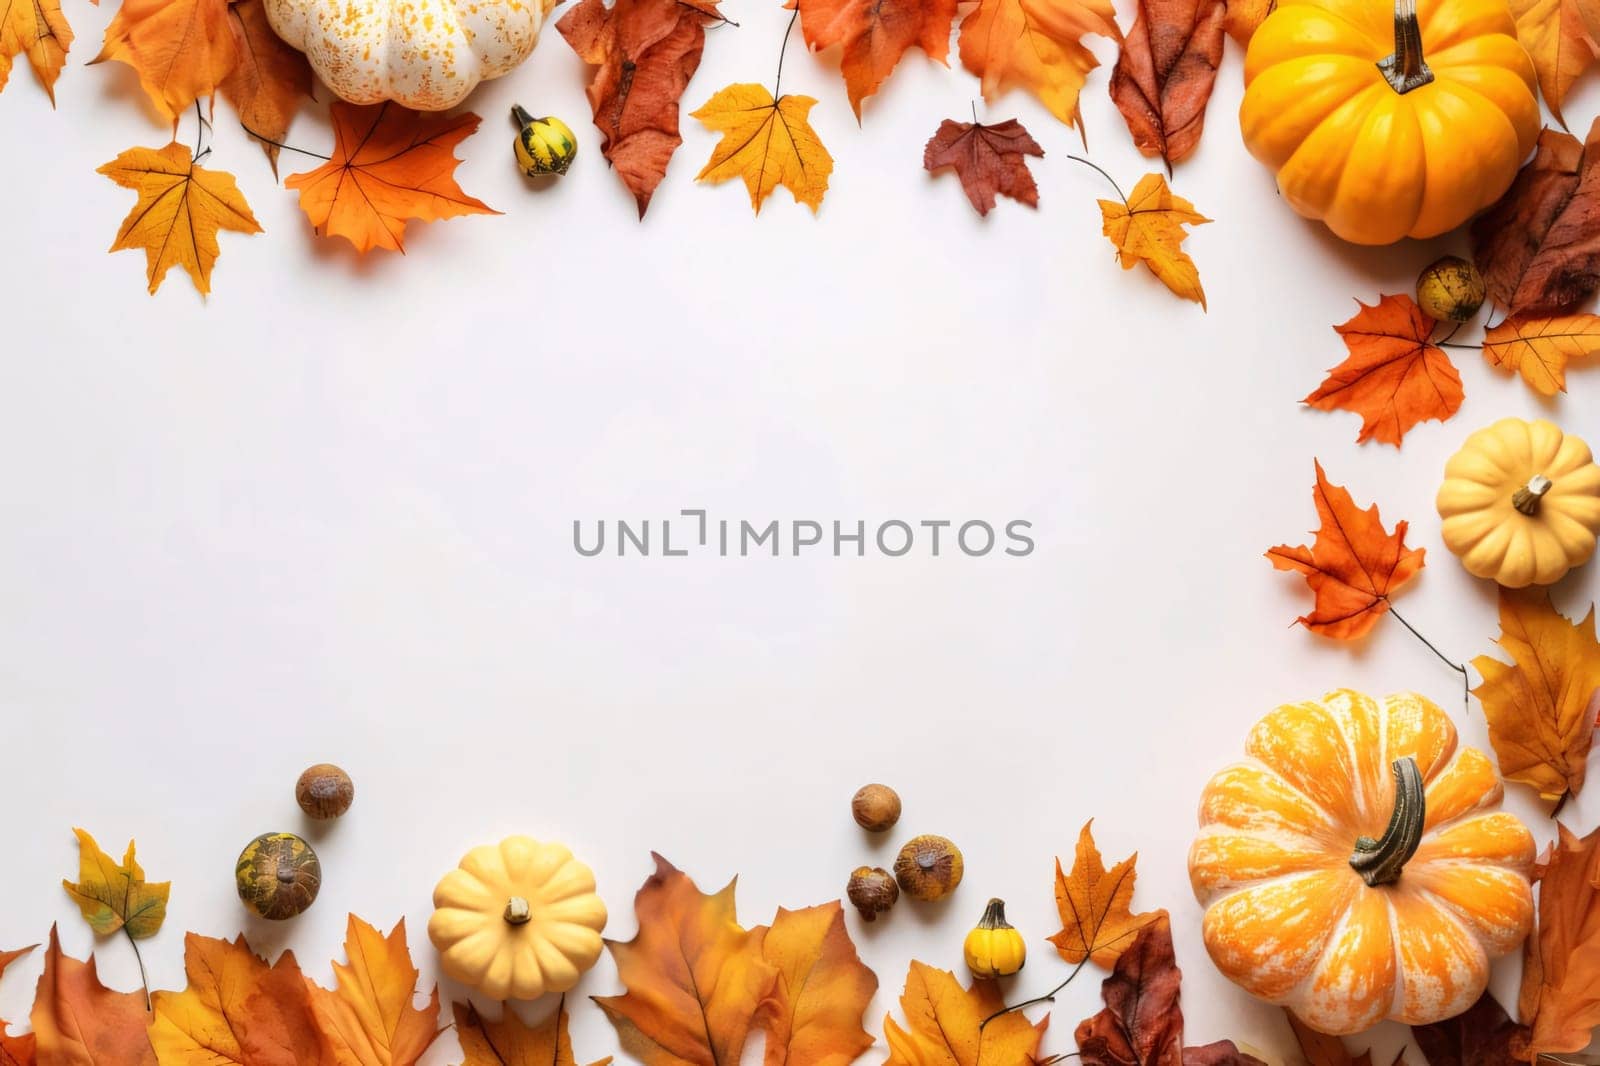 Banner: Autumn background with pumpkins, leaves and acorns on white background